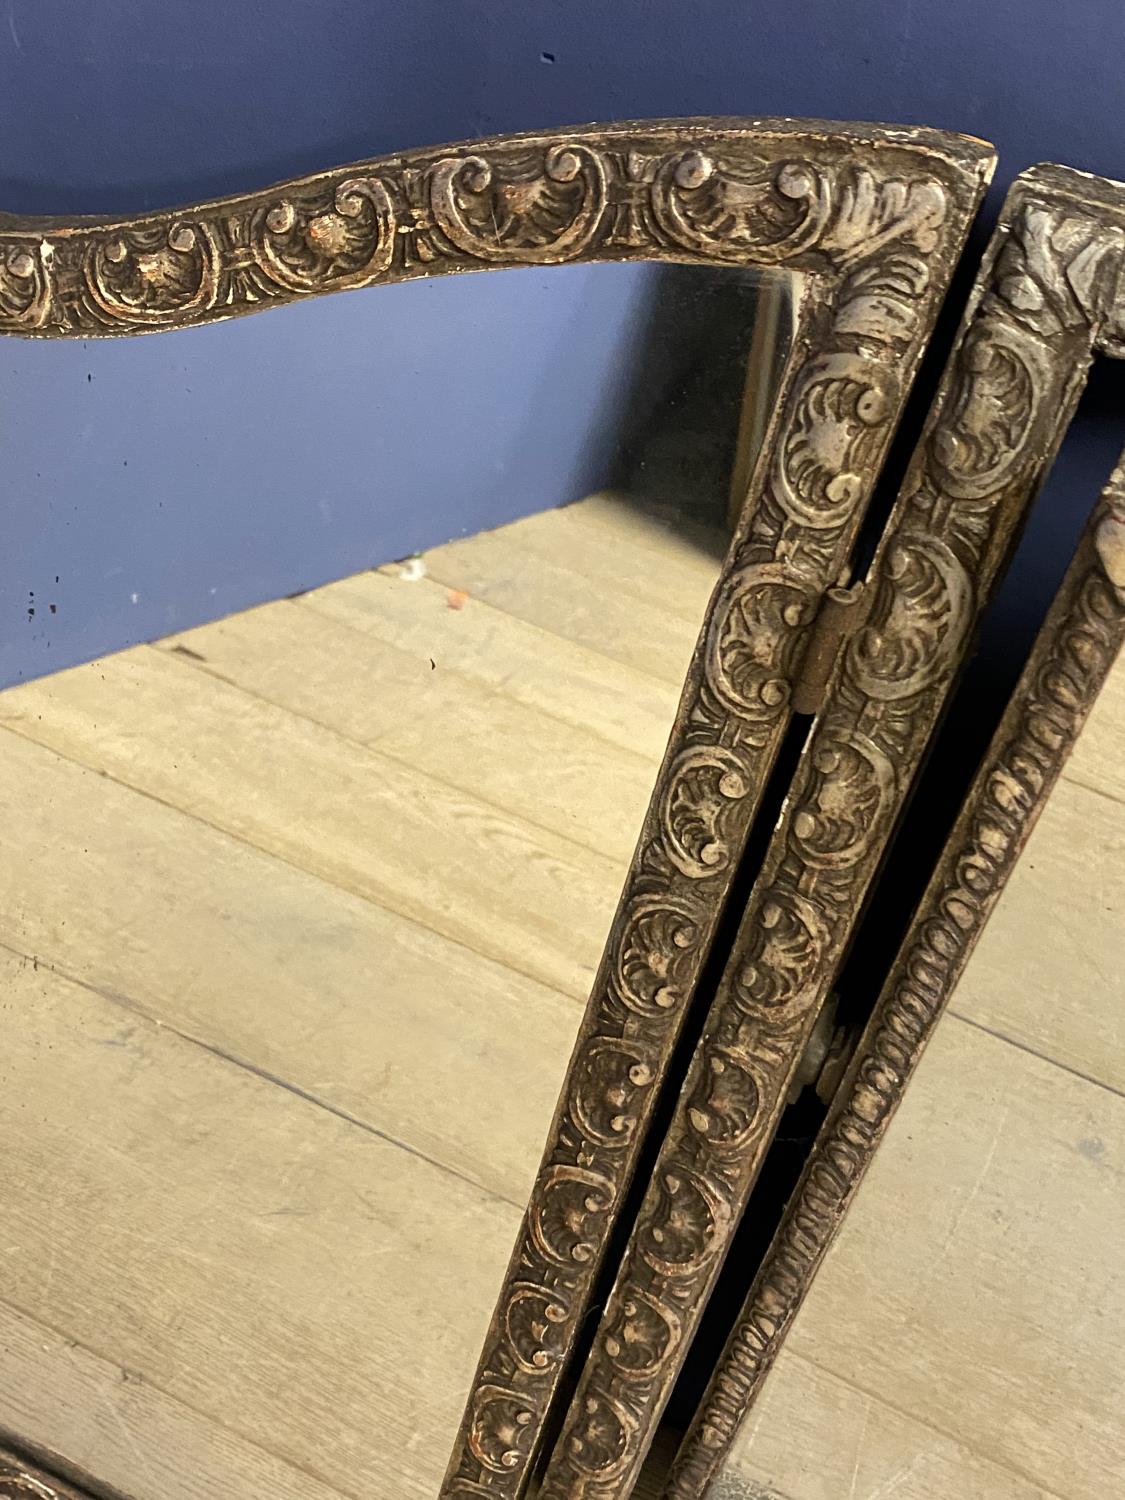 3 panelled dressing table mirror, 79 x 115cm overall (condition - needs restoration) - Image 4 of 4